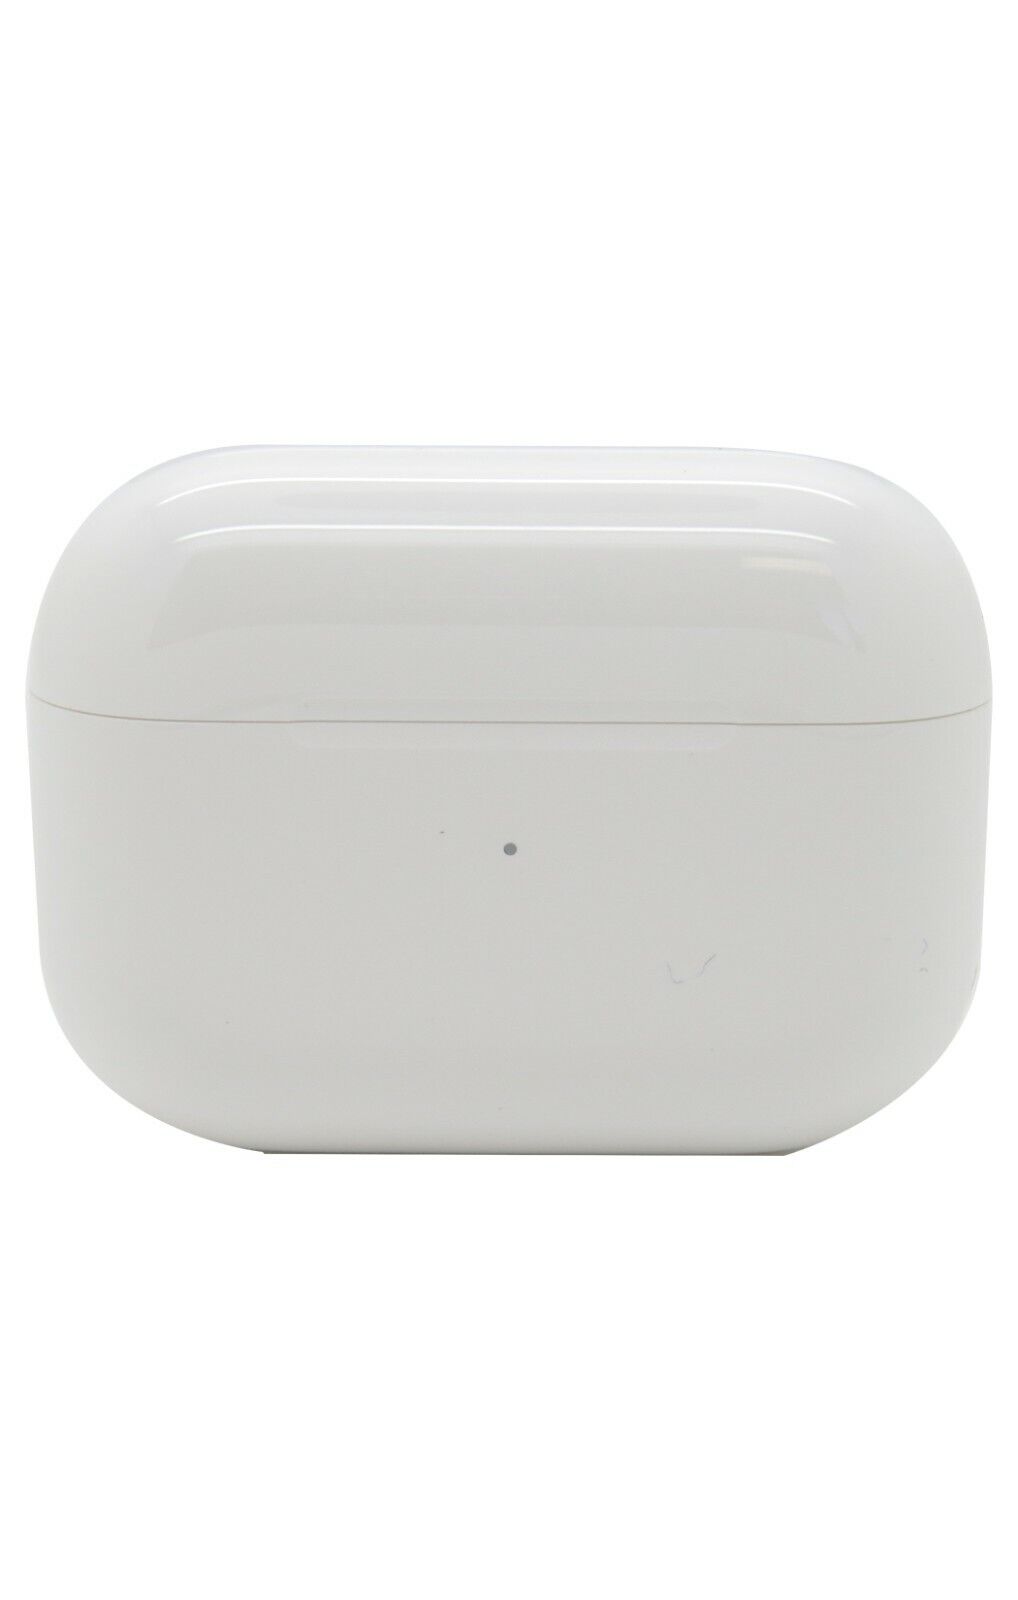 Apple AirPods Pro With Wireless Charging Case White MWP22AM/A